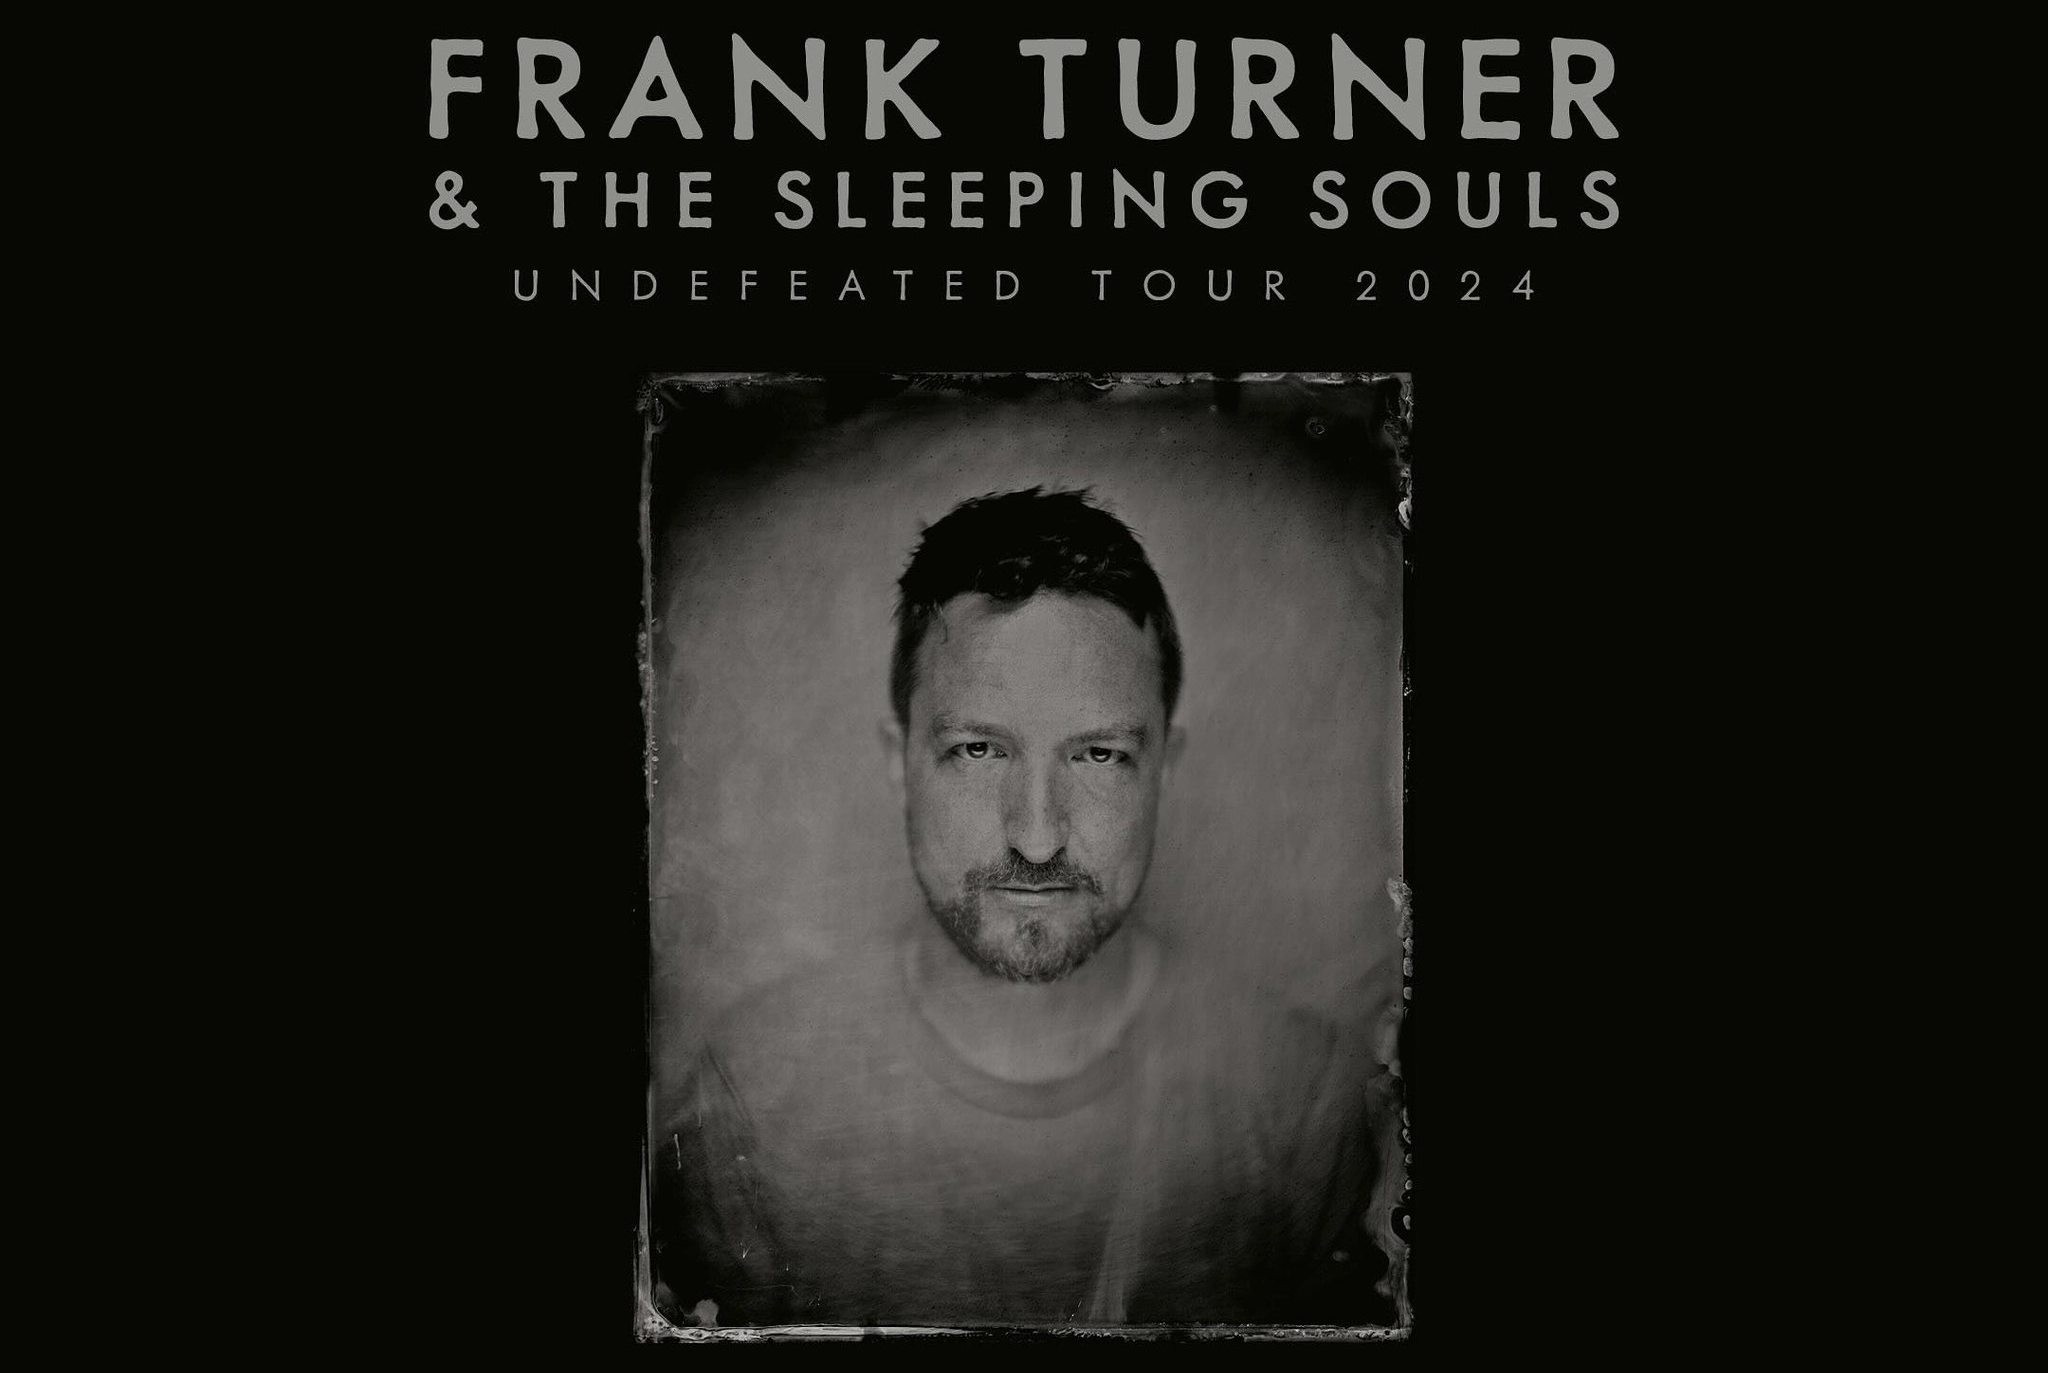 Frank Turner And The Sleeping Souls at Brudenell Social Club Tickets